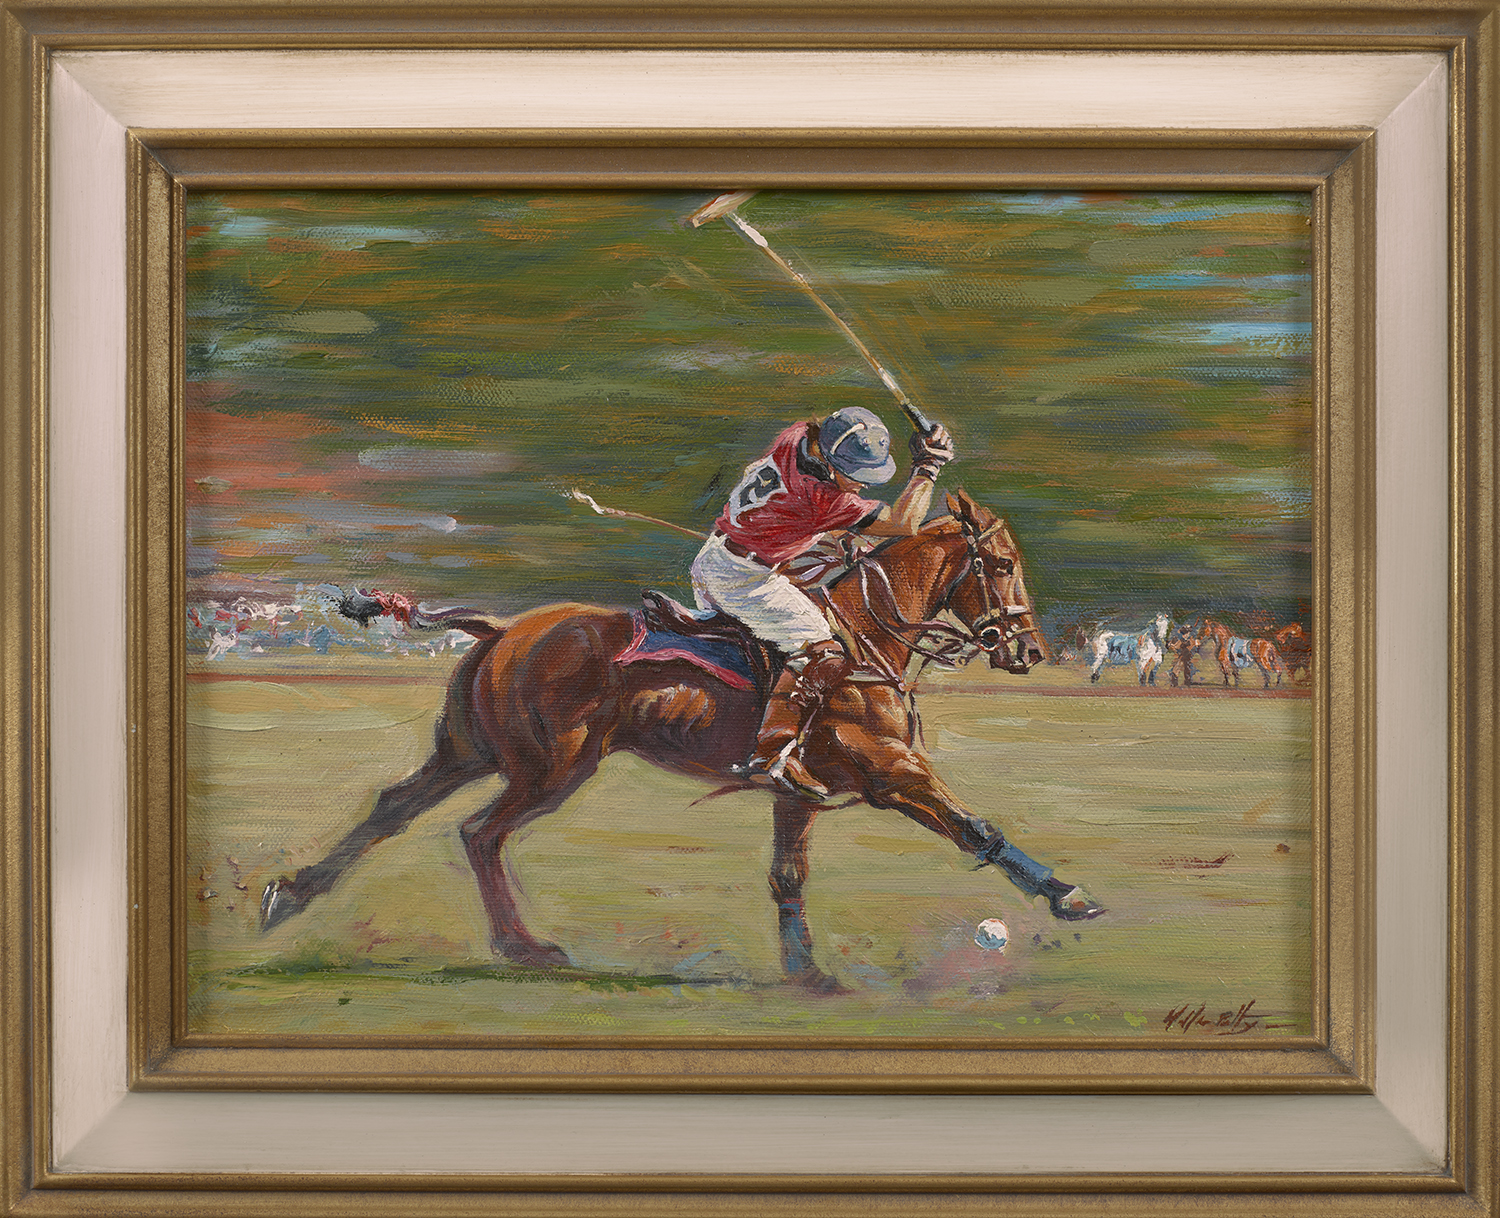 william_petty_p7d_polo_action_1_framed.jpg